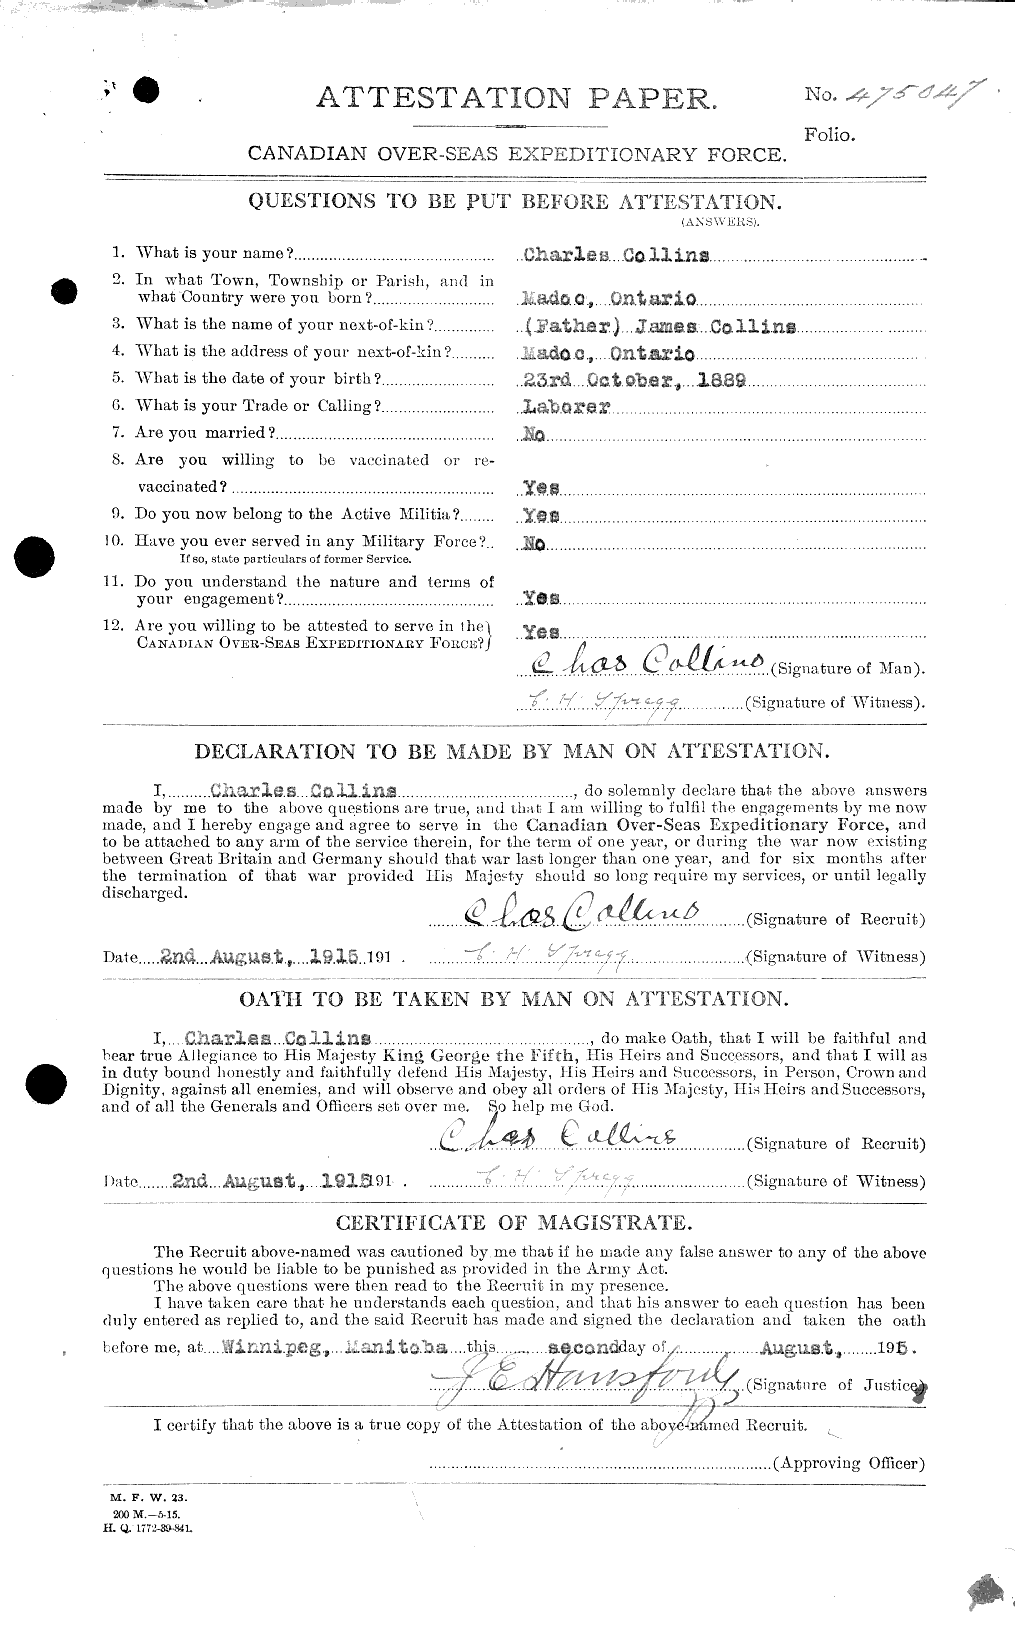 Personnel Records of the First World War - CEF 029011a